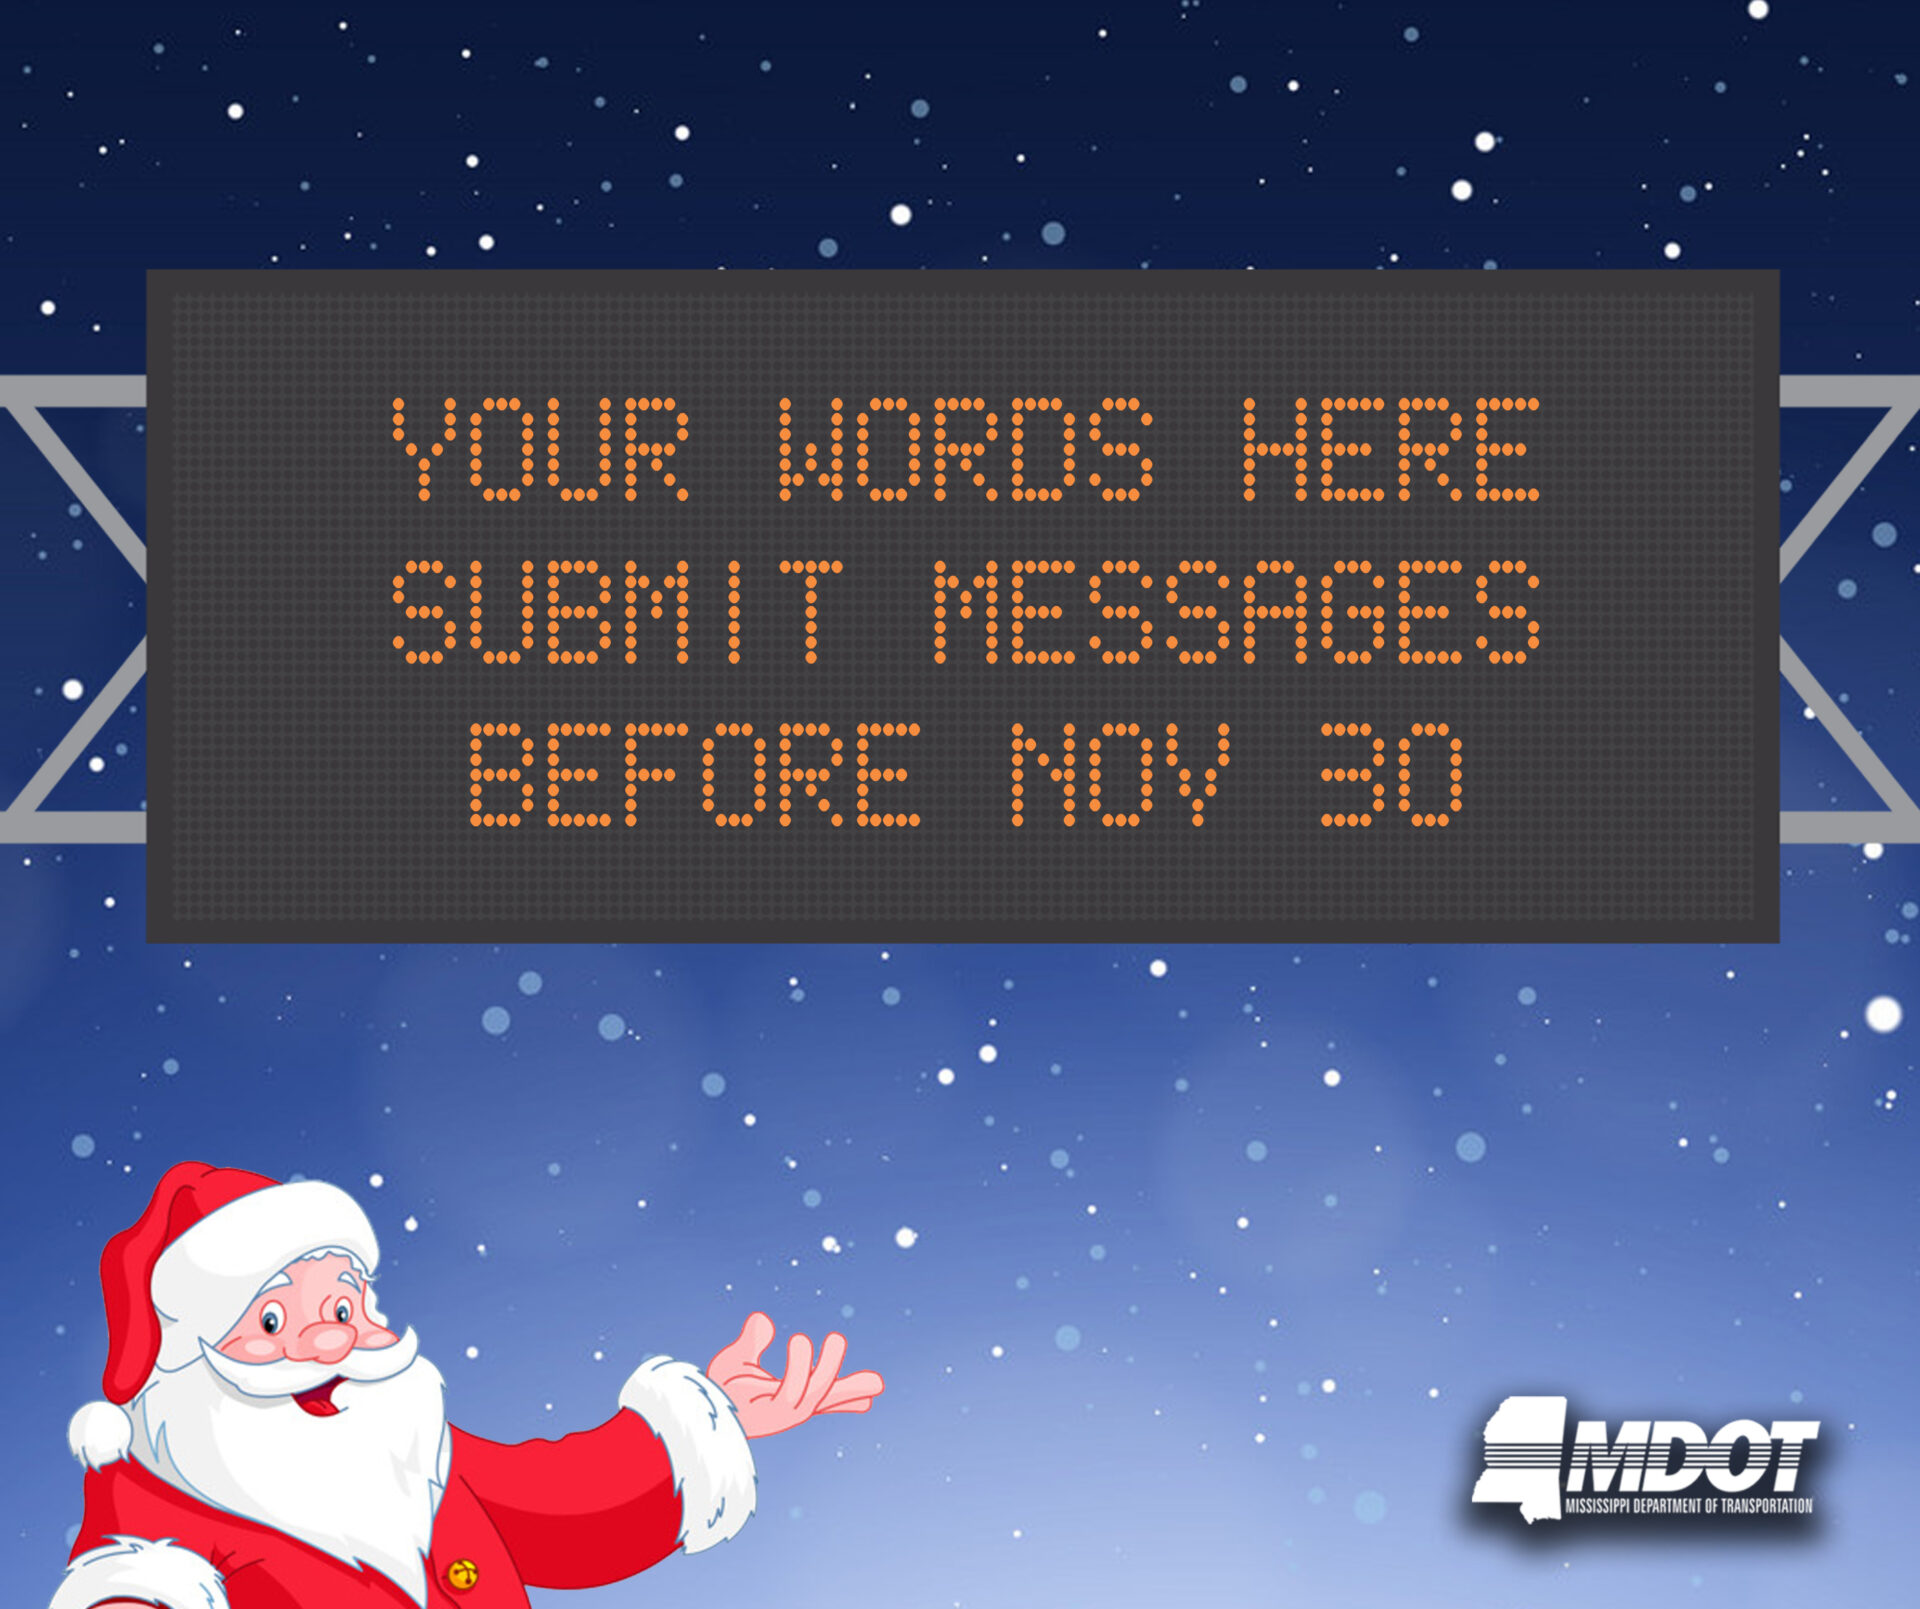 Help MDOT Spread Holiday Safety Messages on MS Highways